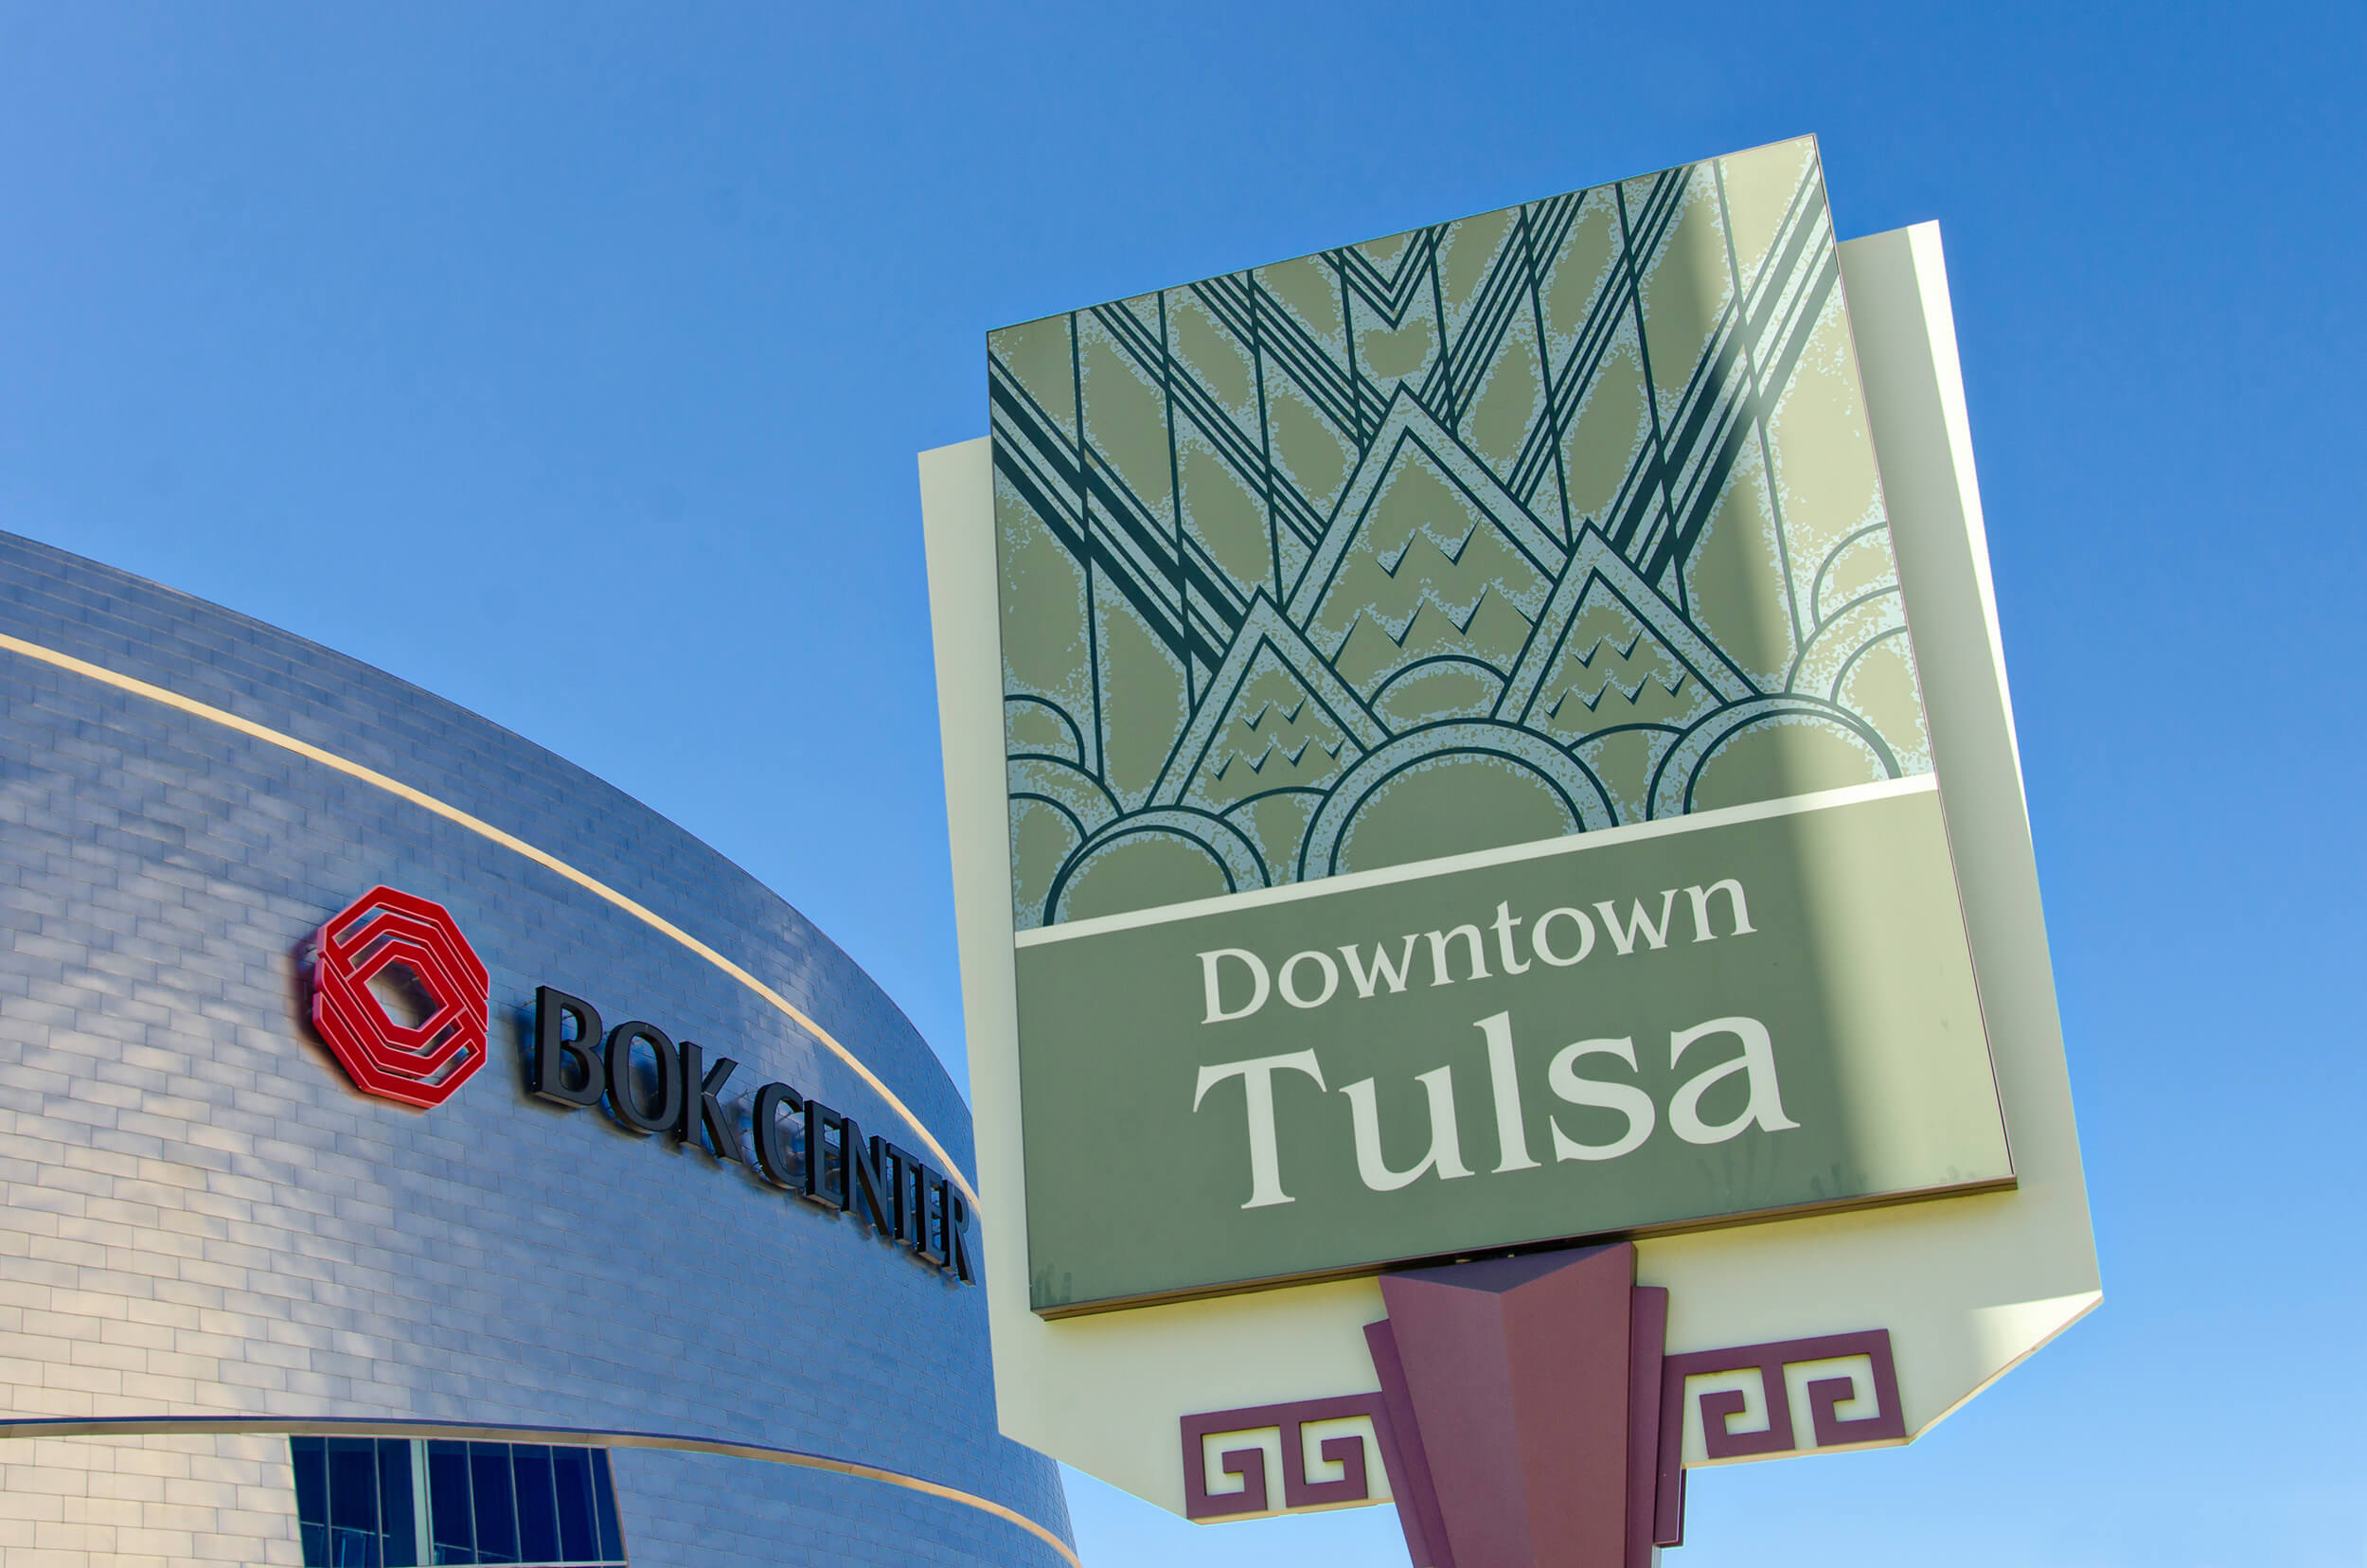 downtown tulsa graphic sign.